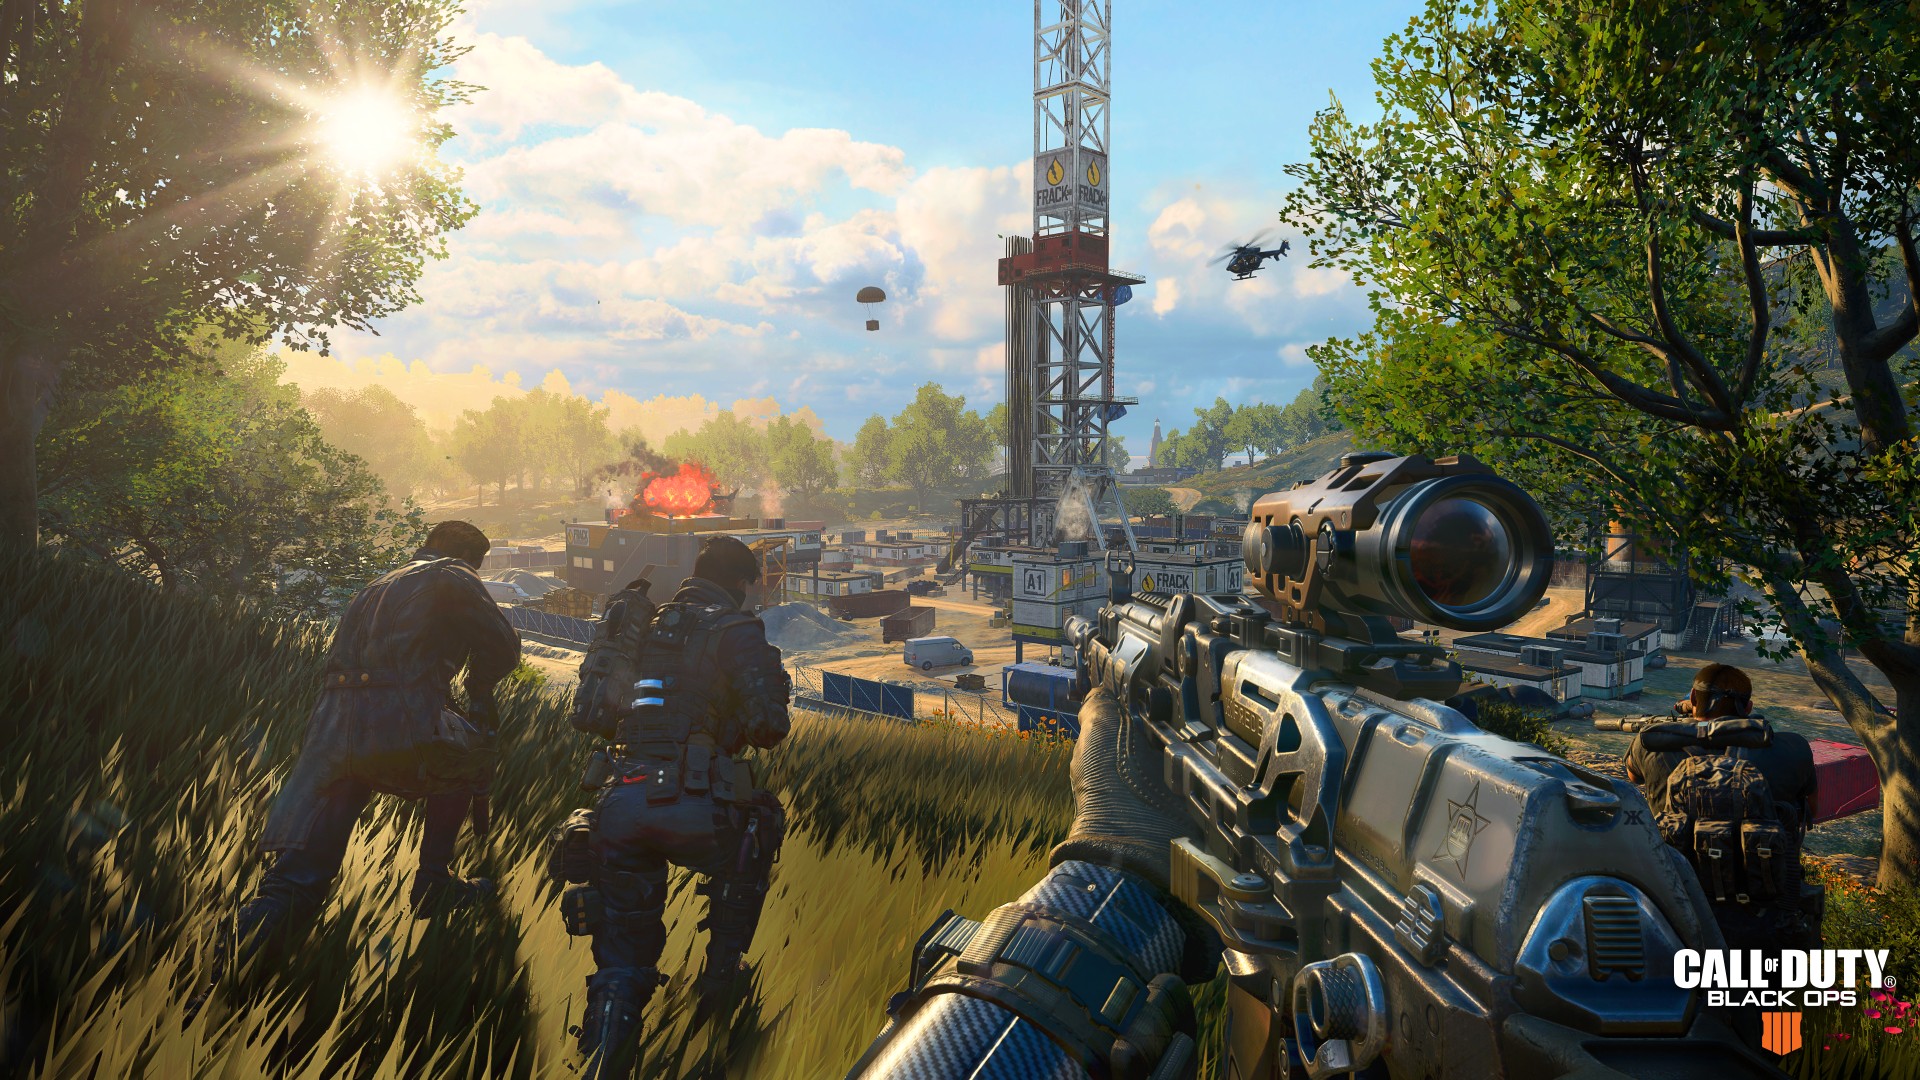 Play free trial of Call of Duty: Black Ops 4 Blackout now on Xbox One Blackout-Screen-1.jpg